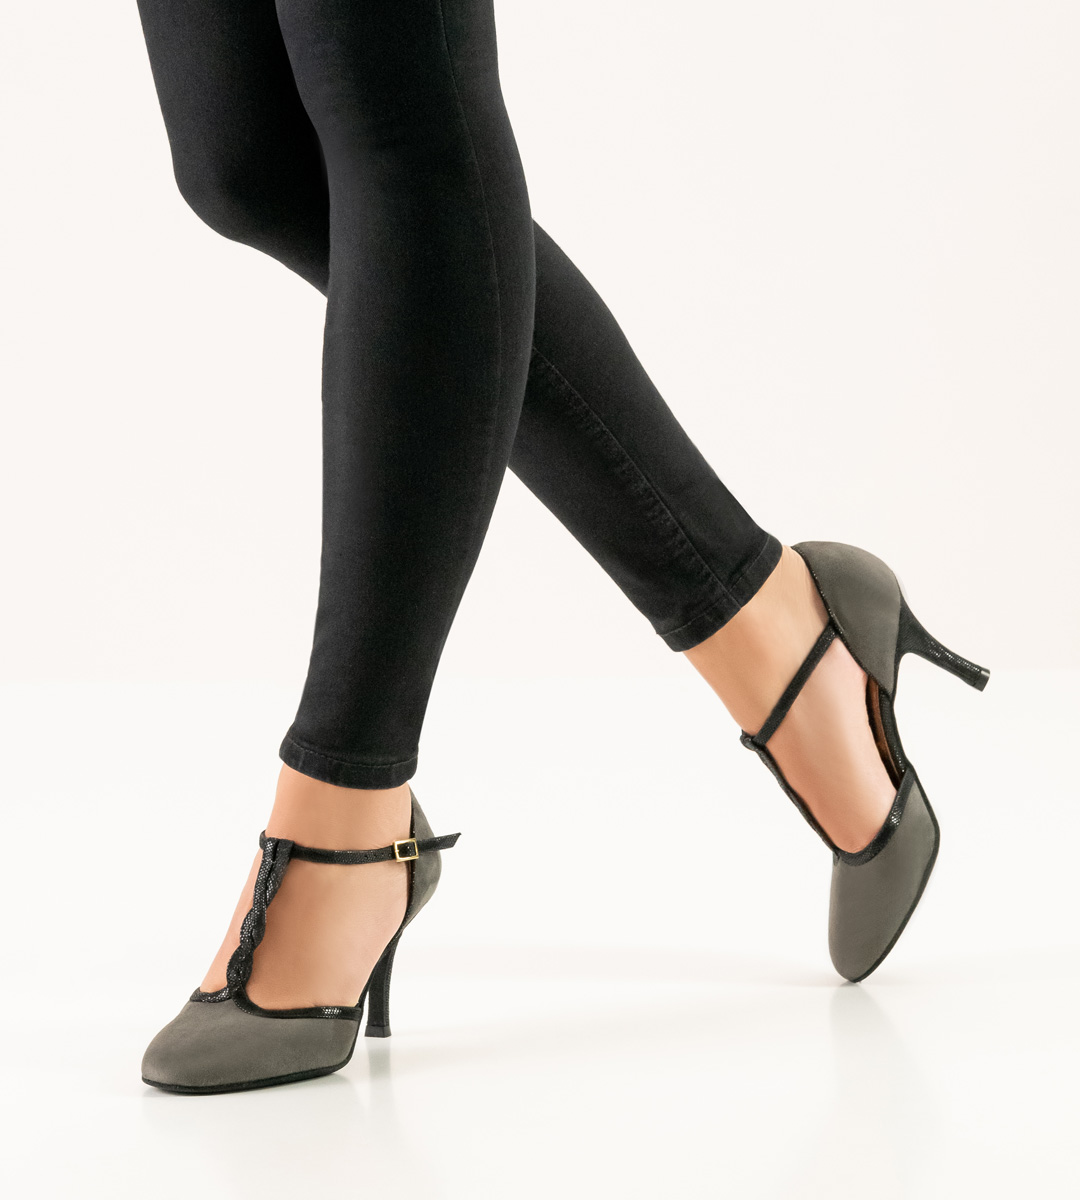 Grey women's dance shoe by Nueva Epoca in combination with black and trousers in black